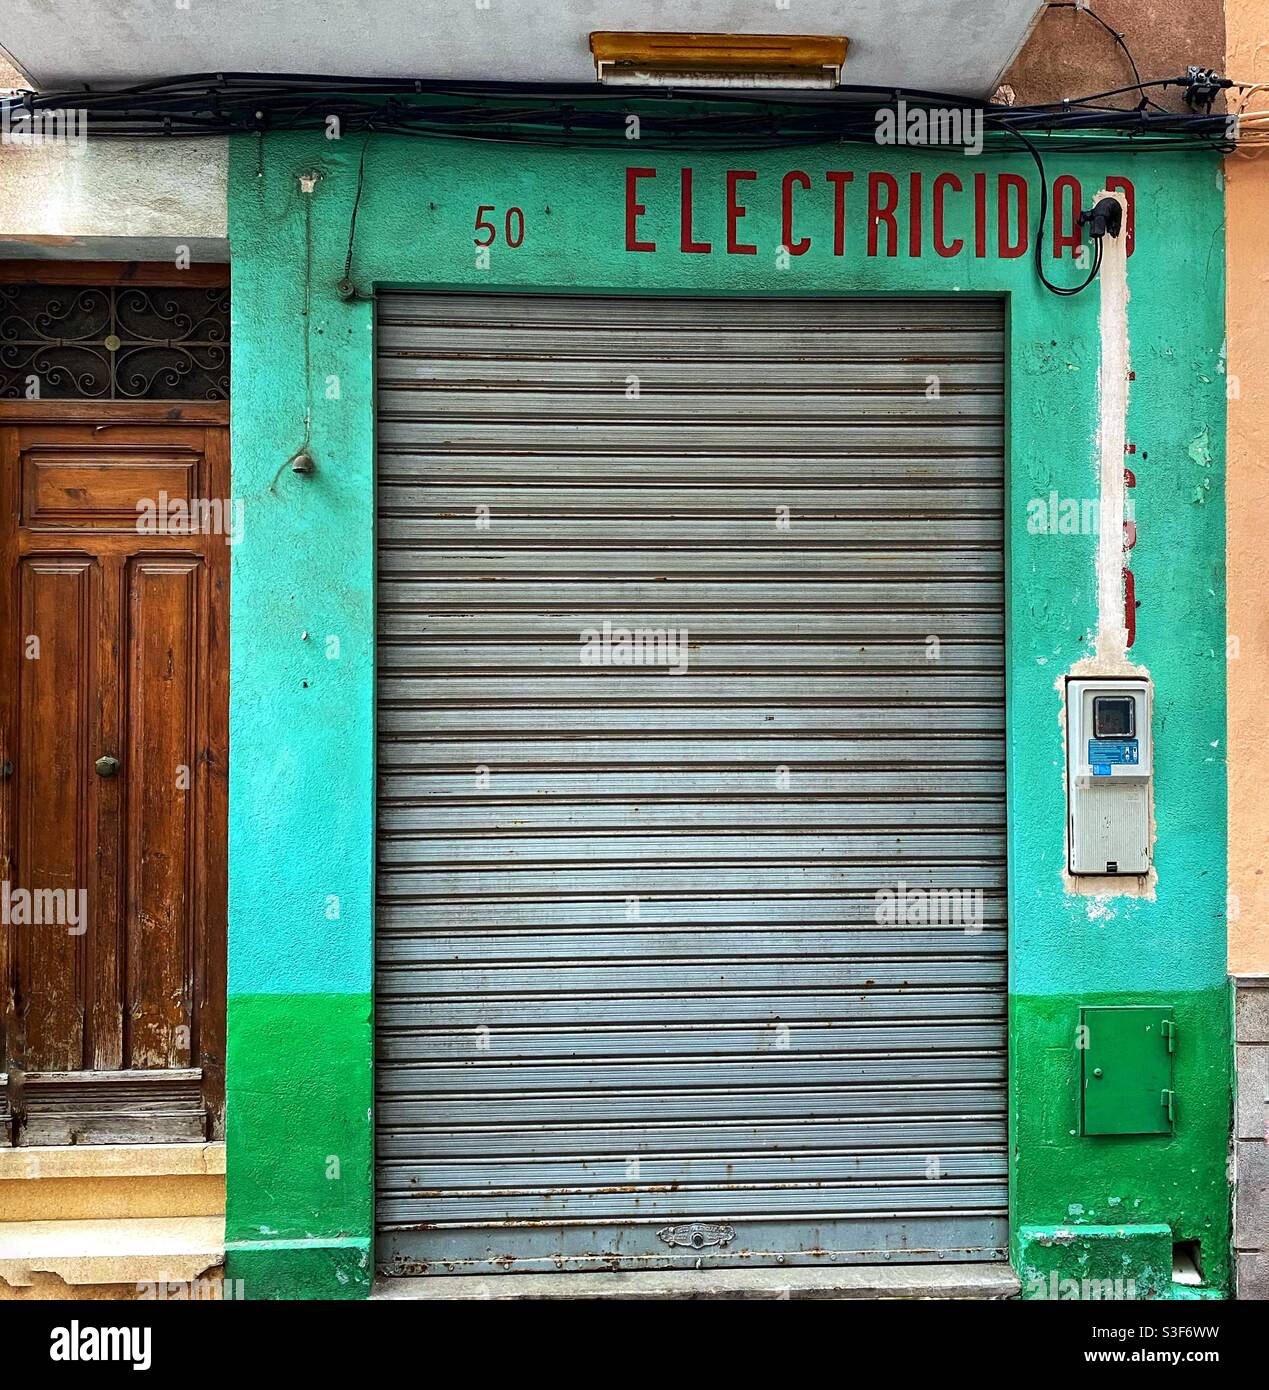 The front of an Old electricity shop in a village Stock Photo